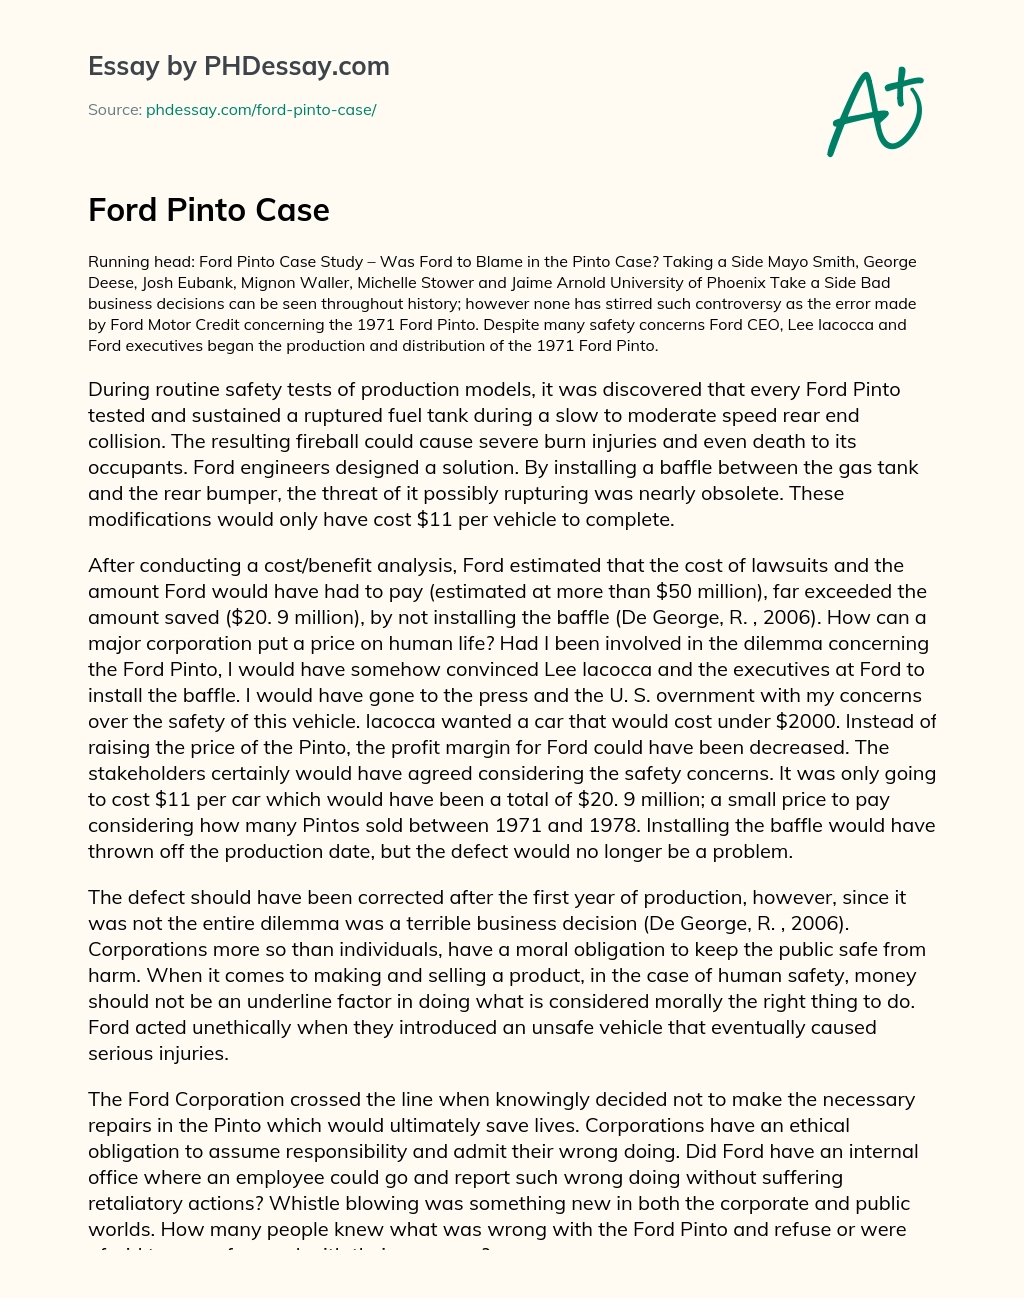 Ford Pinto Case essay